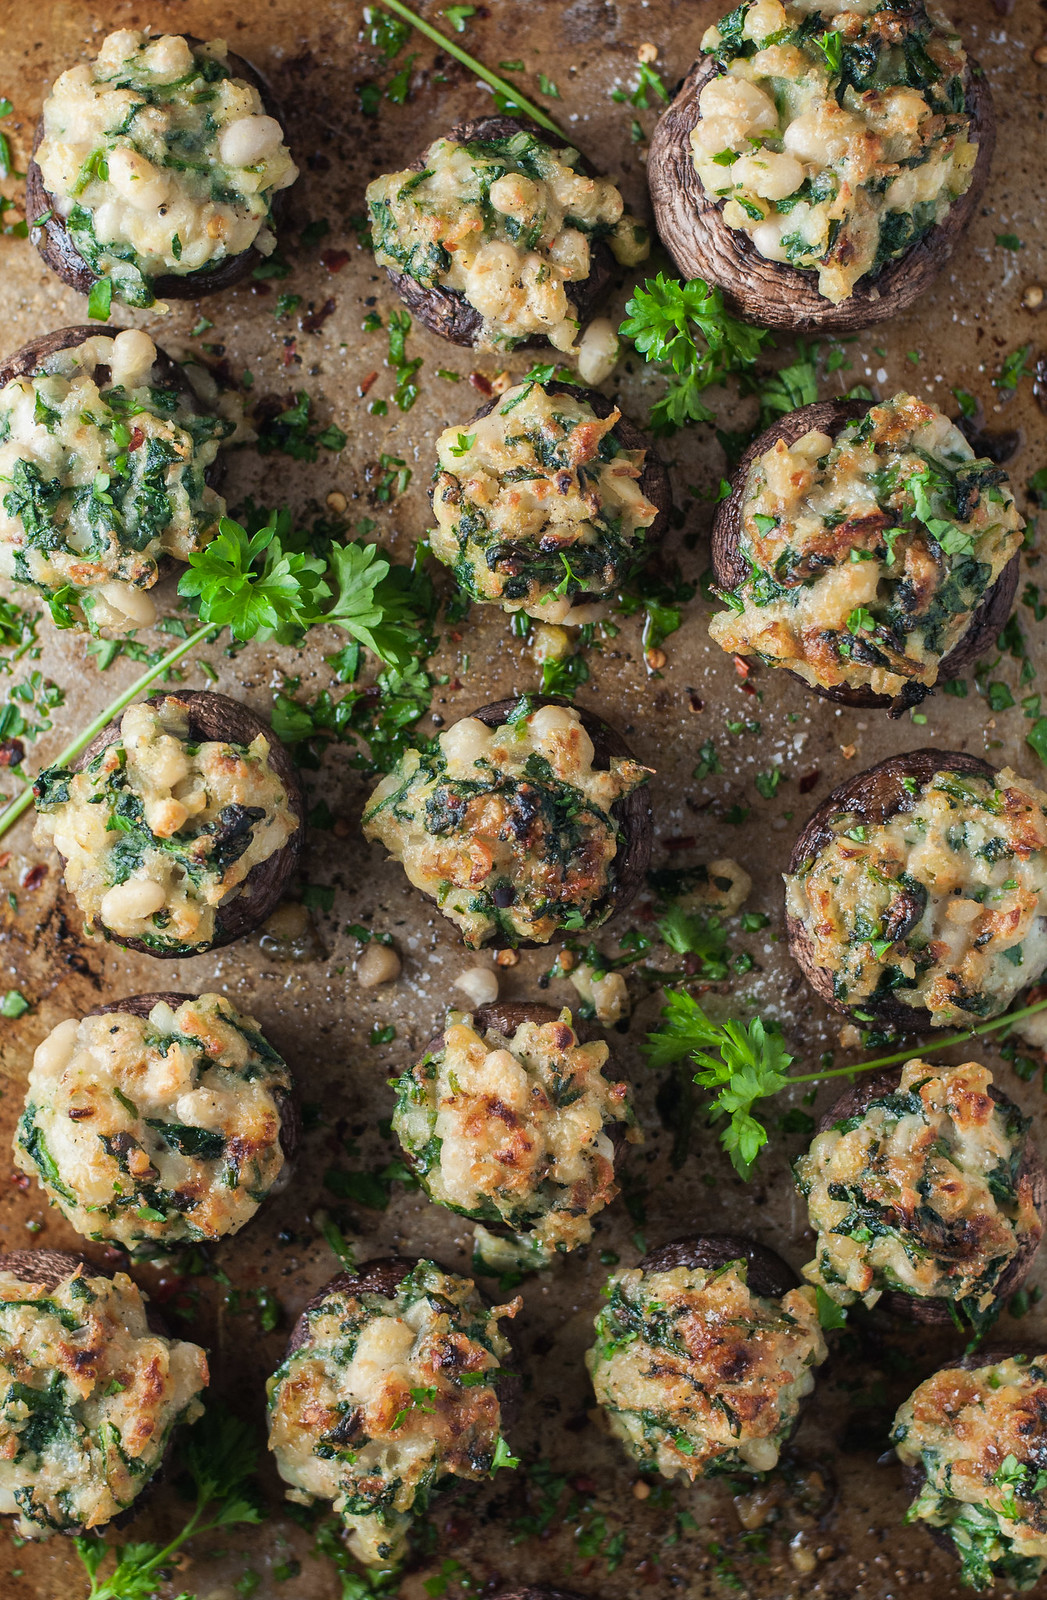 White bean and blue cheese stuffed mushrooms - perfect #glutenfree holiday app | recipe at Natural Comfort Kitchen